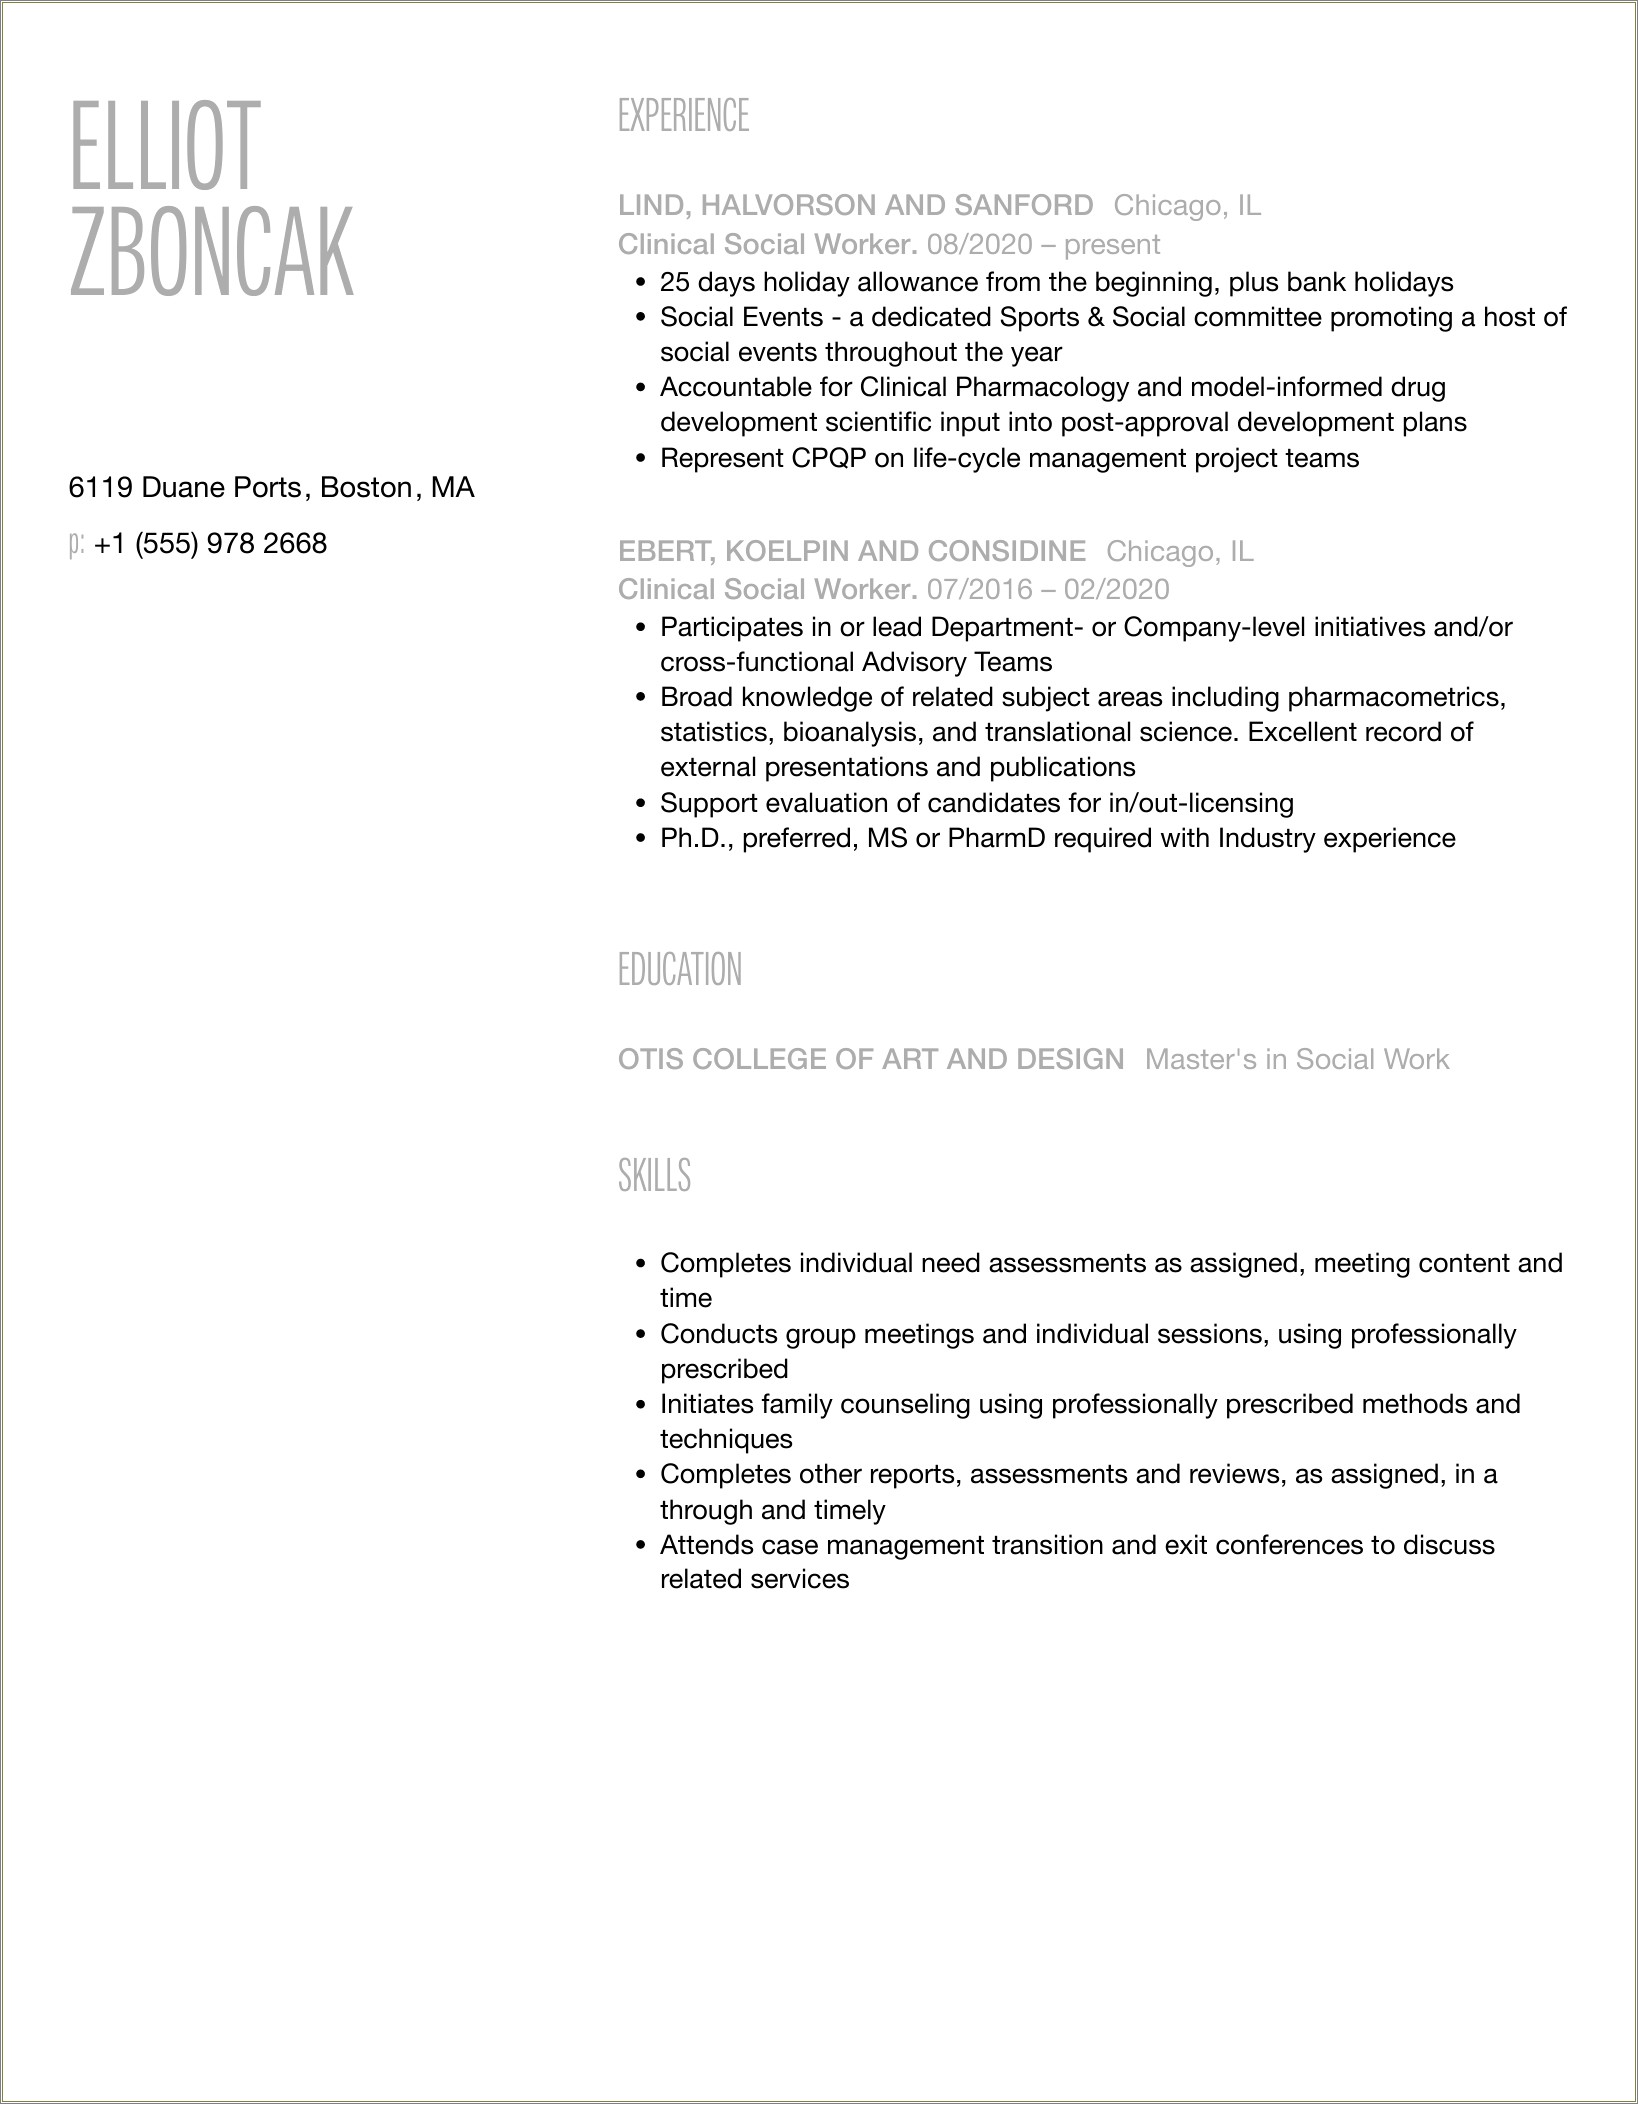 Functional Resume Template For Social Worker